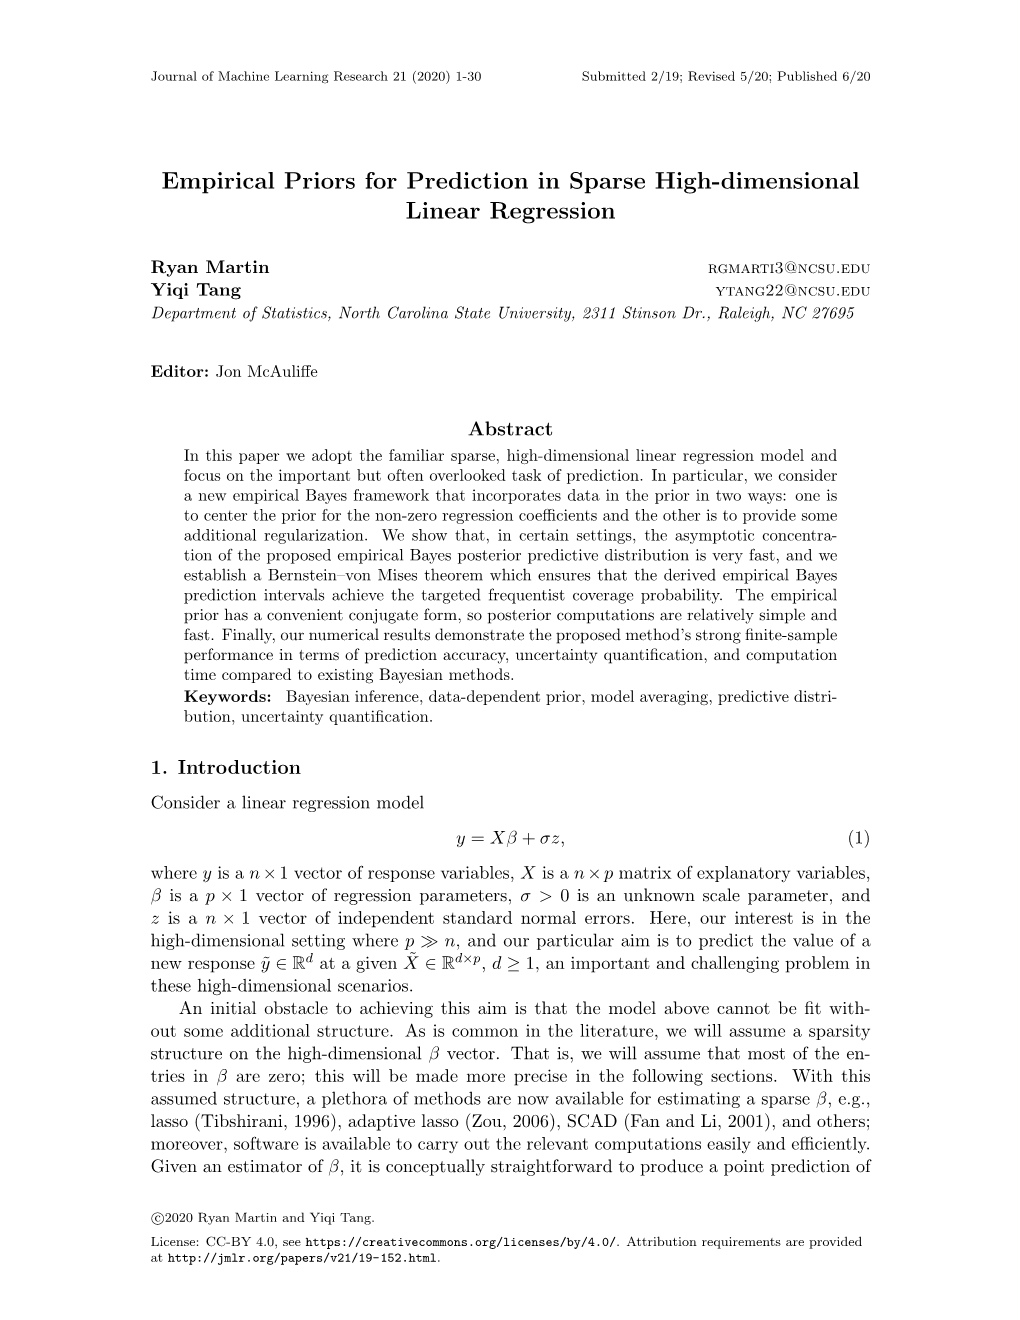 Empirical Priors for Prediction in Sparse High-Dimensional Linear Regression